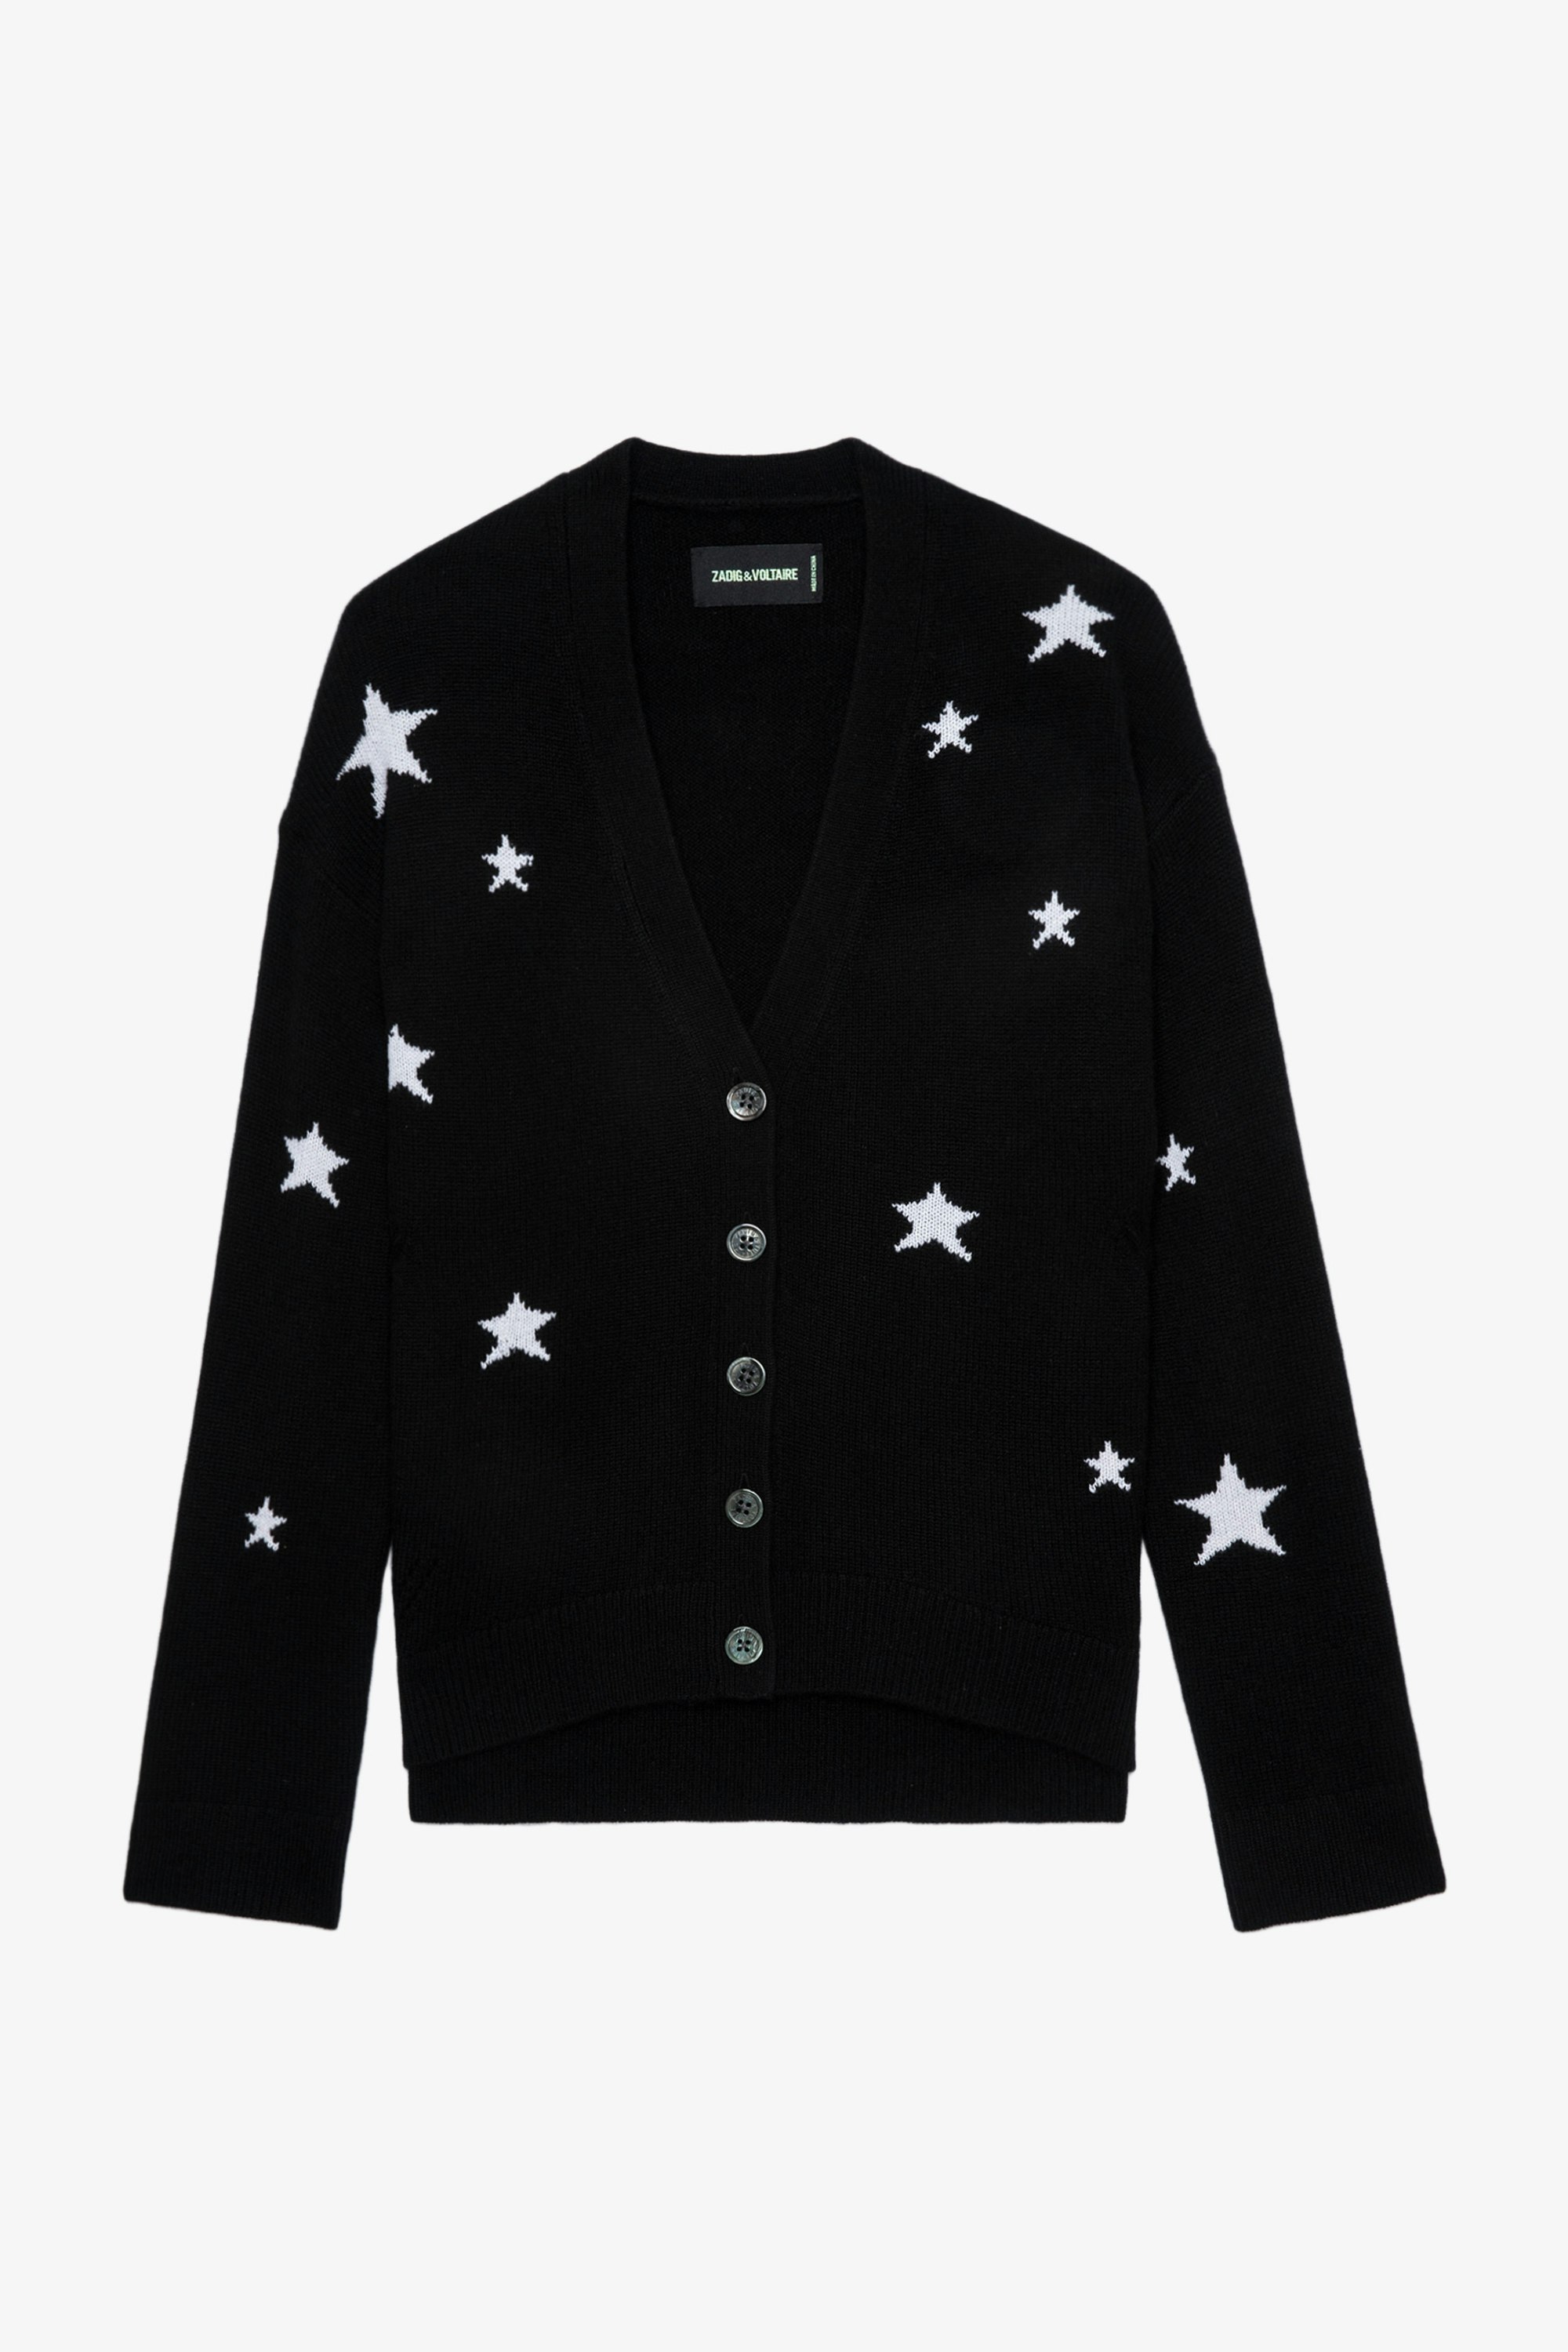 Mirka Stars Cardigan Cashmere - Women’s black cashmere button front cardigan with contrasting star motifs